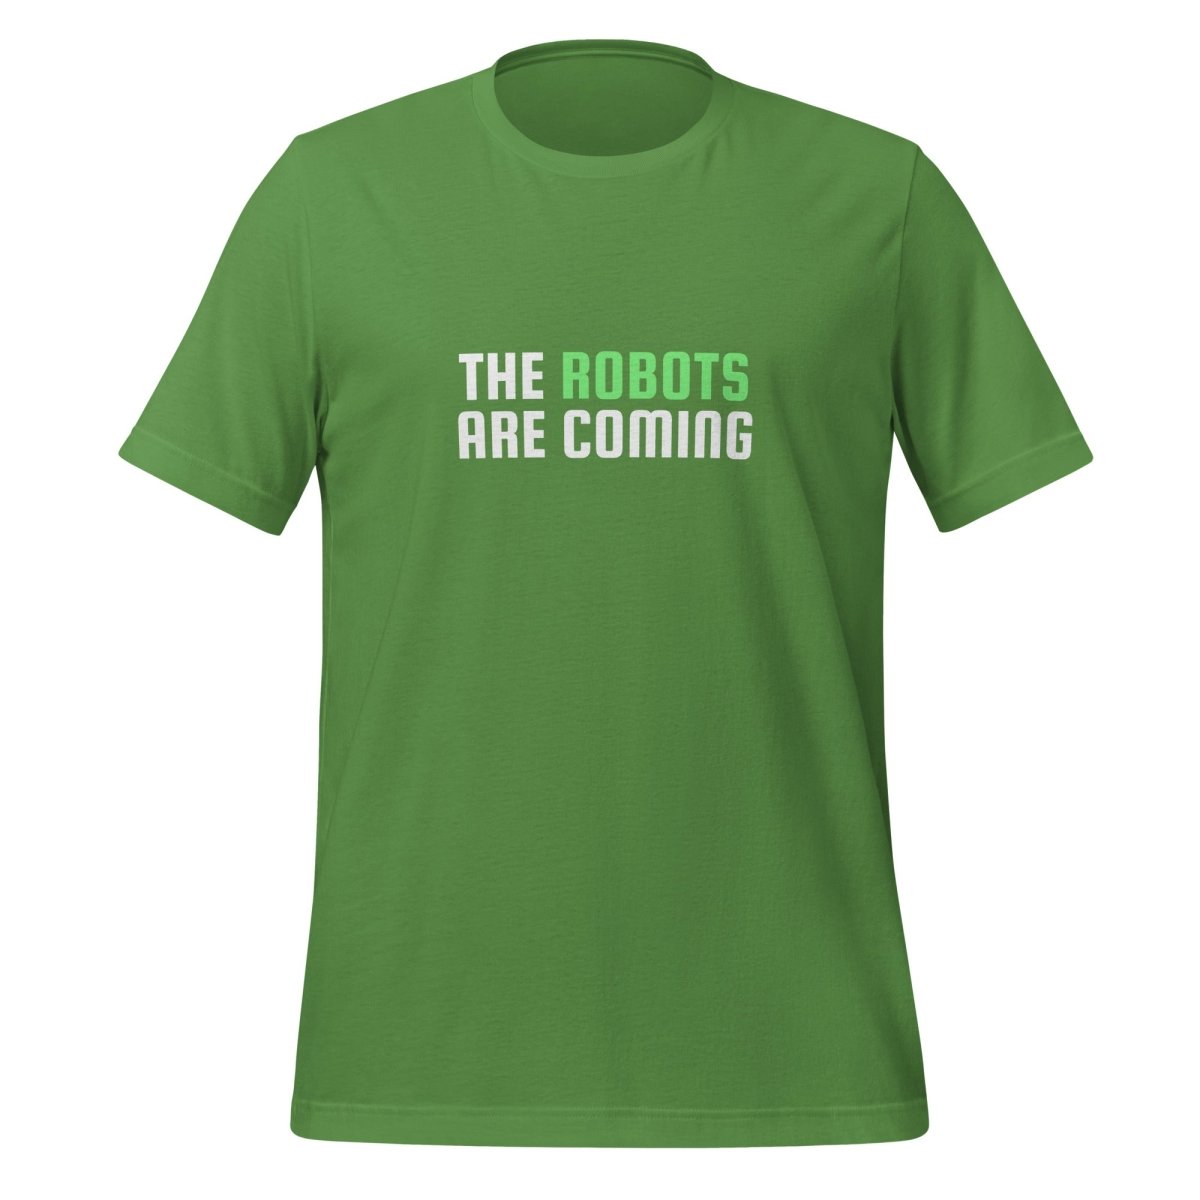 The Robots Are Coming (Green) T - Shirt 2 (unisex) - Leaf - AI Store